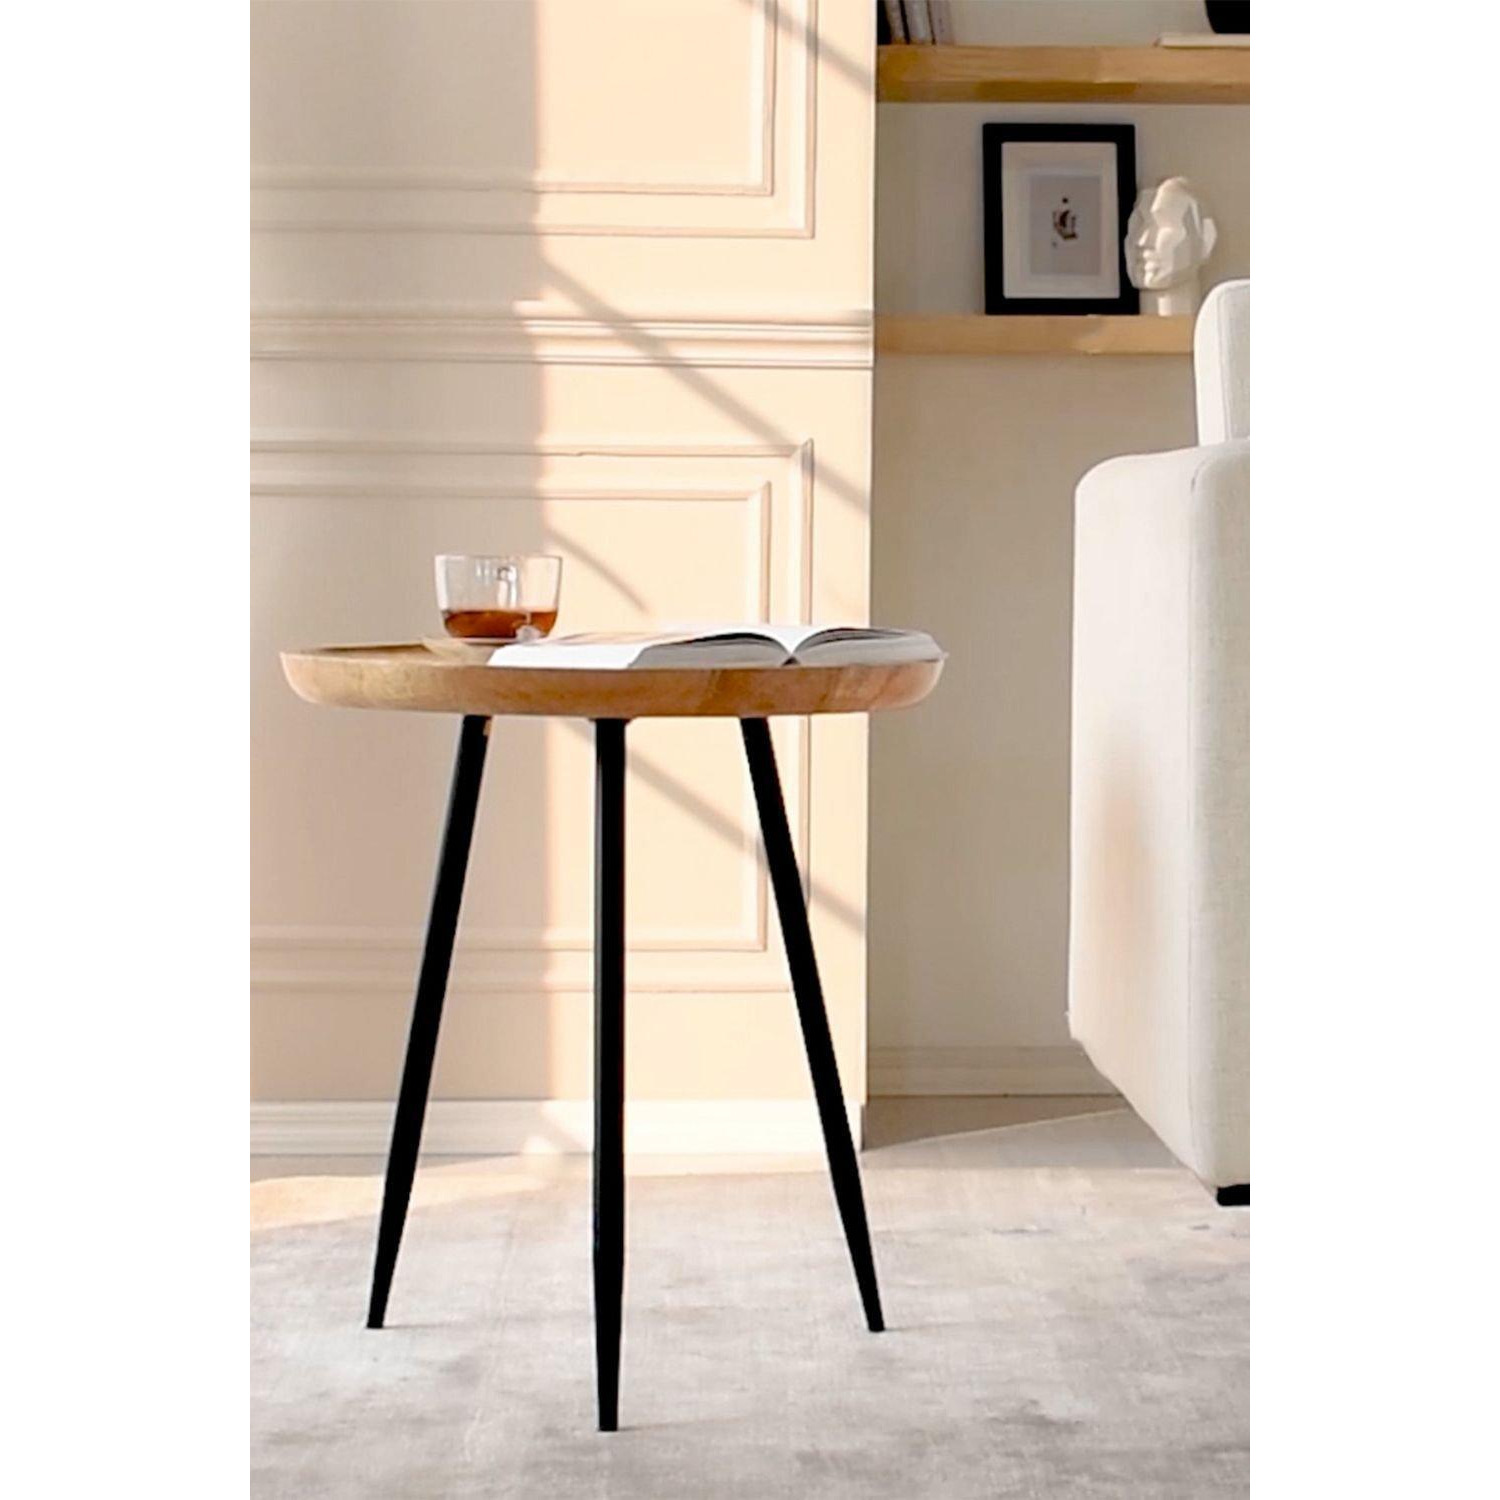 'Chervey' Side Table Solid Mango Wood With Black Tri-Pin Legs - image 1